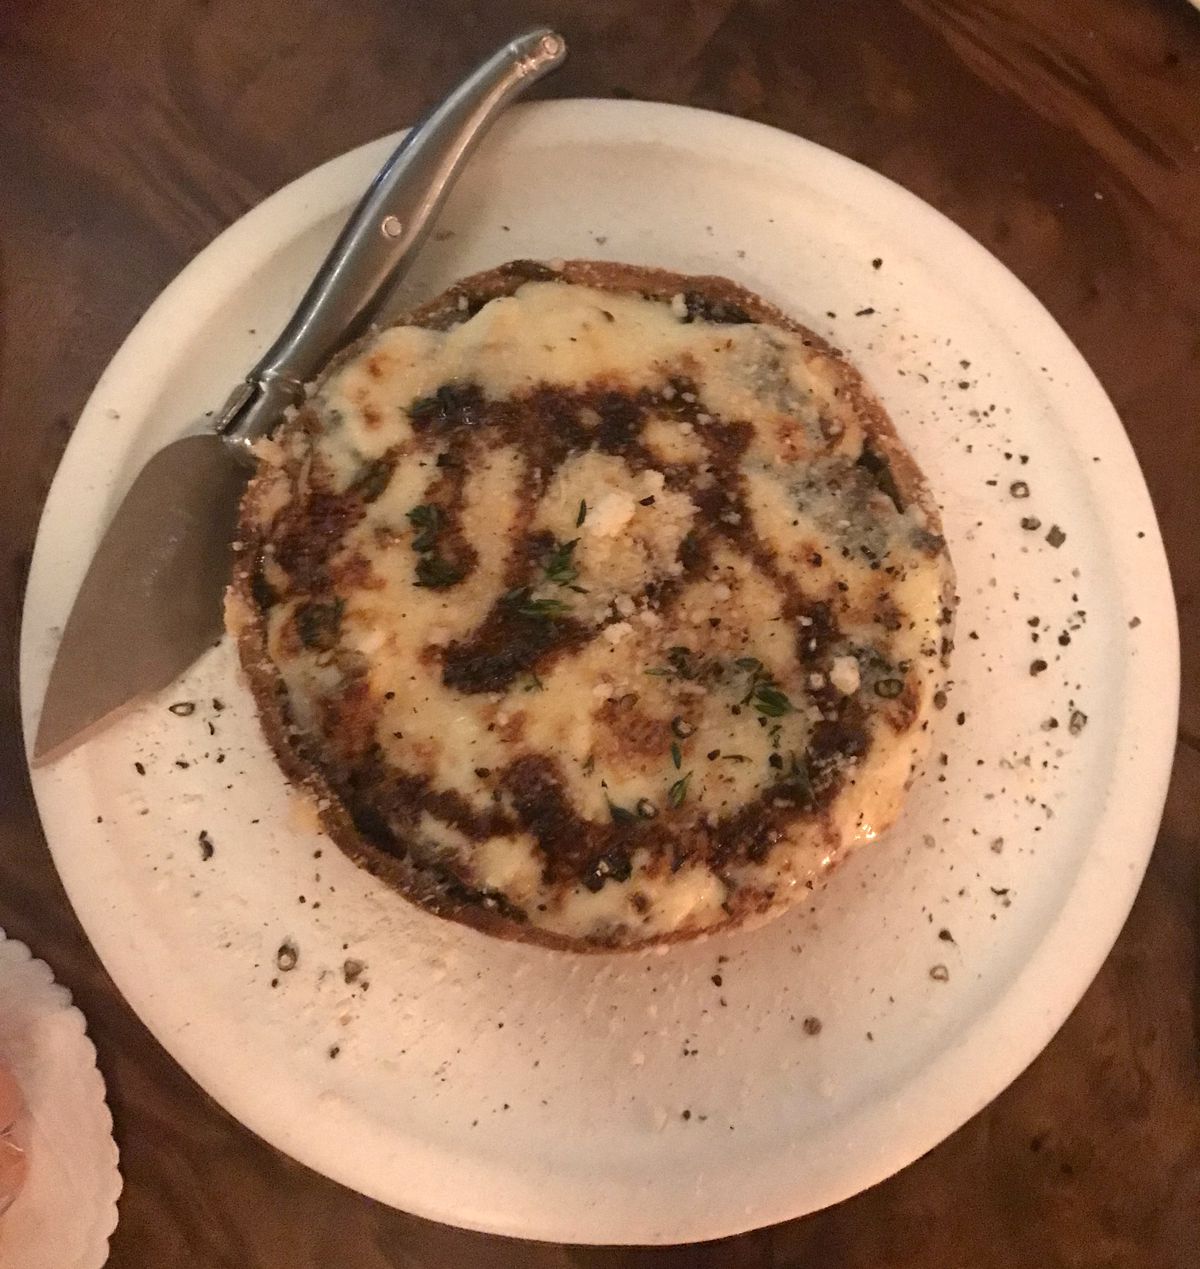 An onion tart sprinkled with pecorino cheese on a white plate with a serving device next to it.